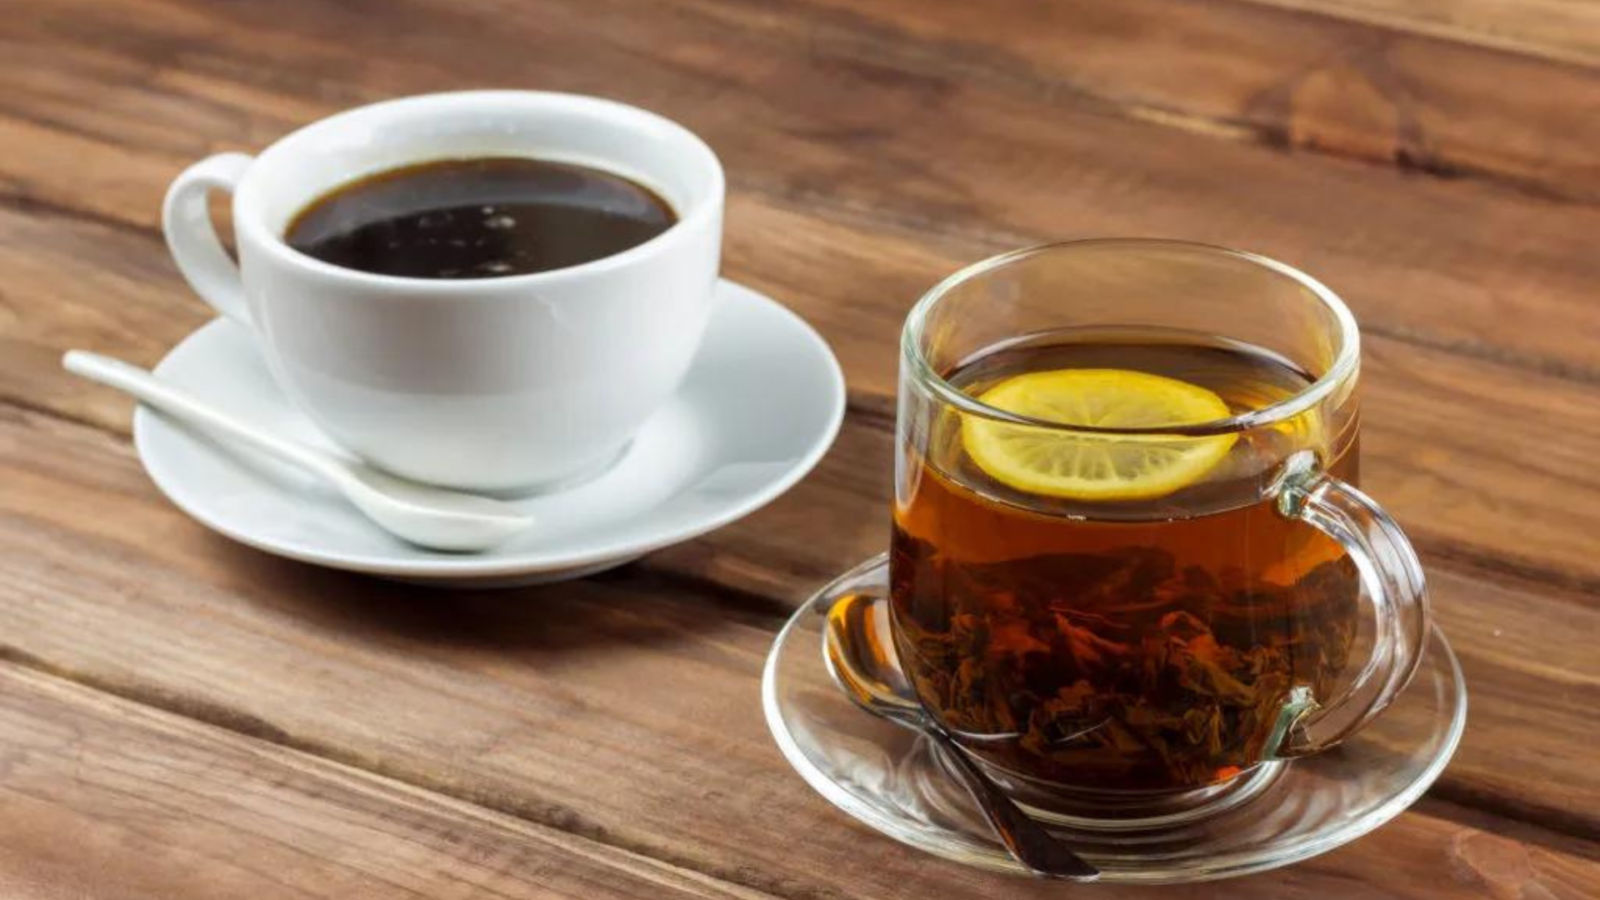 Tea and coffee are both good sources of antioxidants and caffeine, but which is better for you?